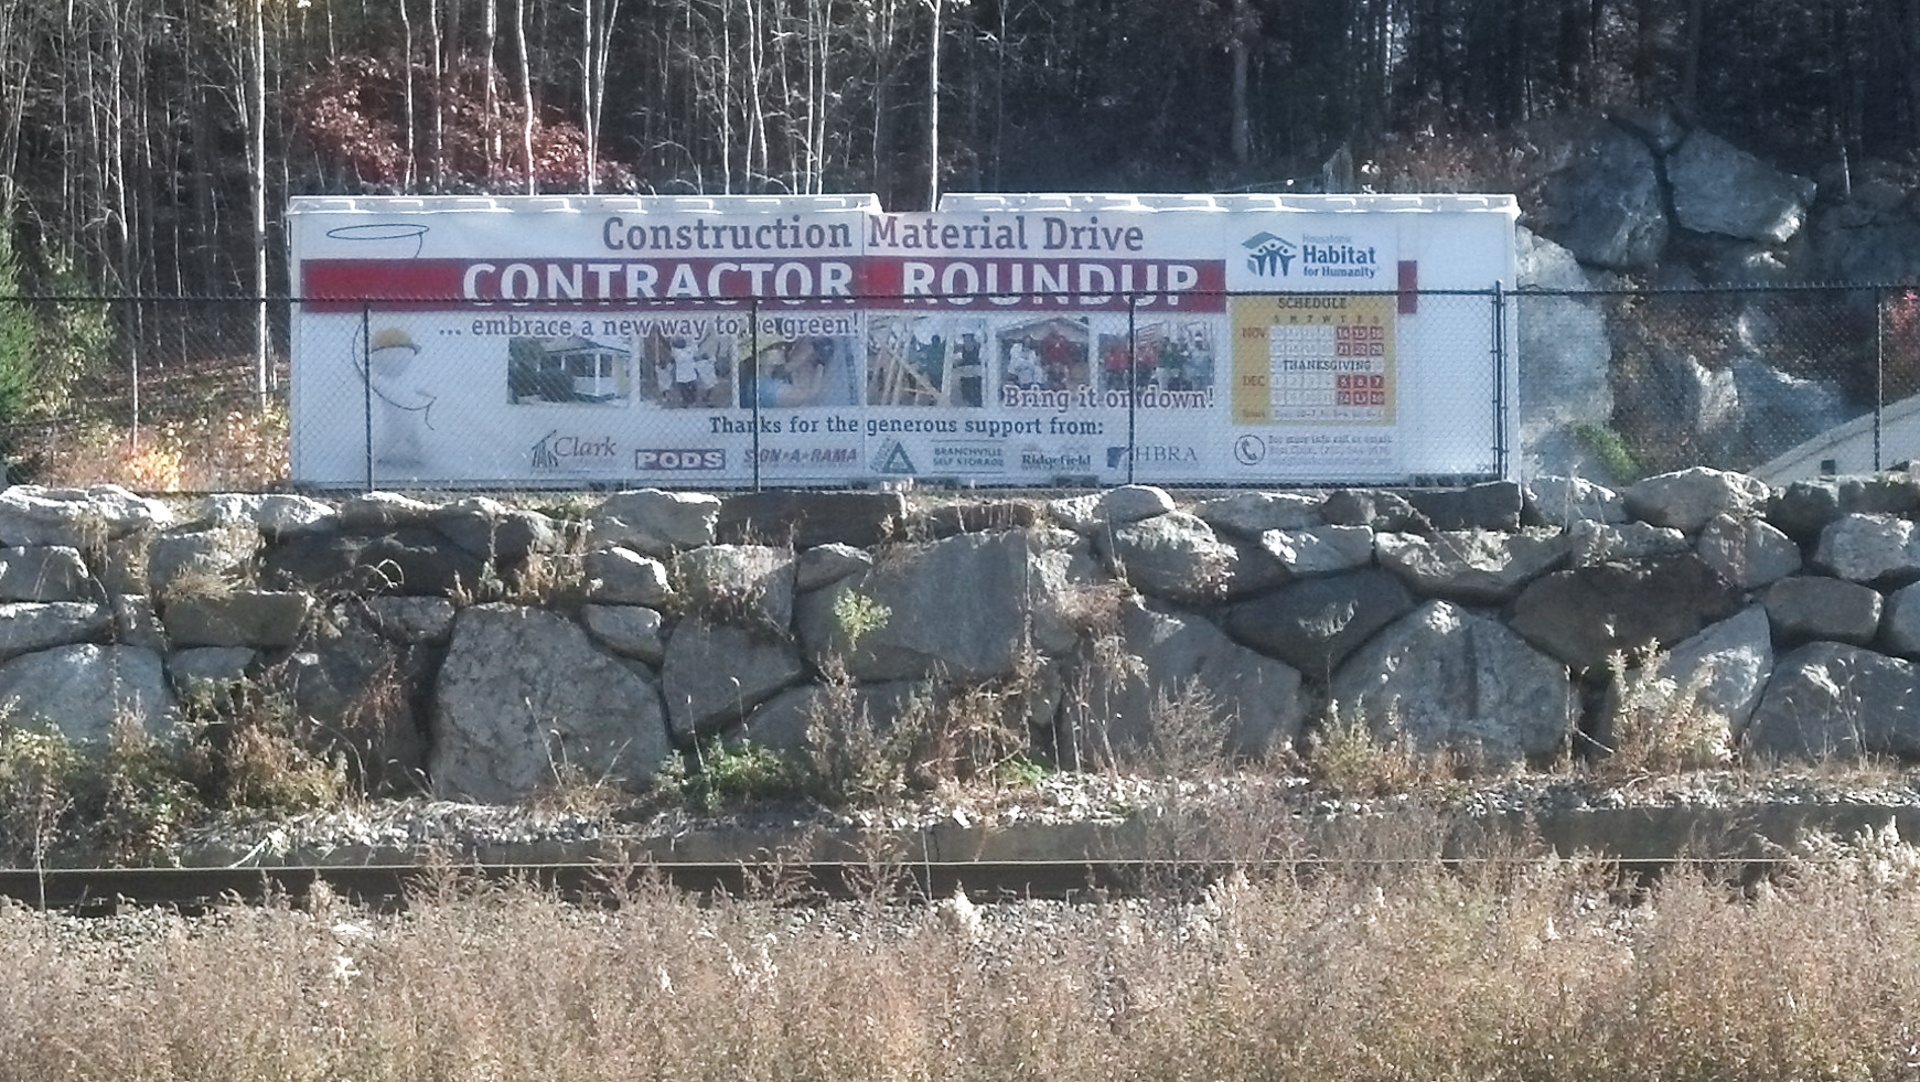 Clark Construction's Contractor Roundup Collection Point